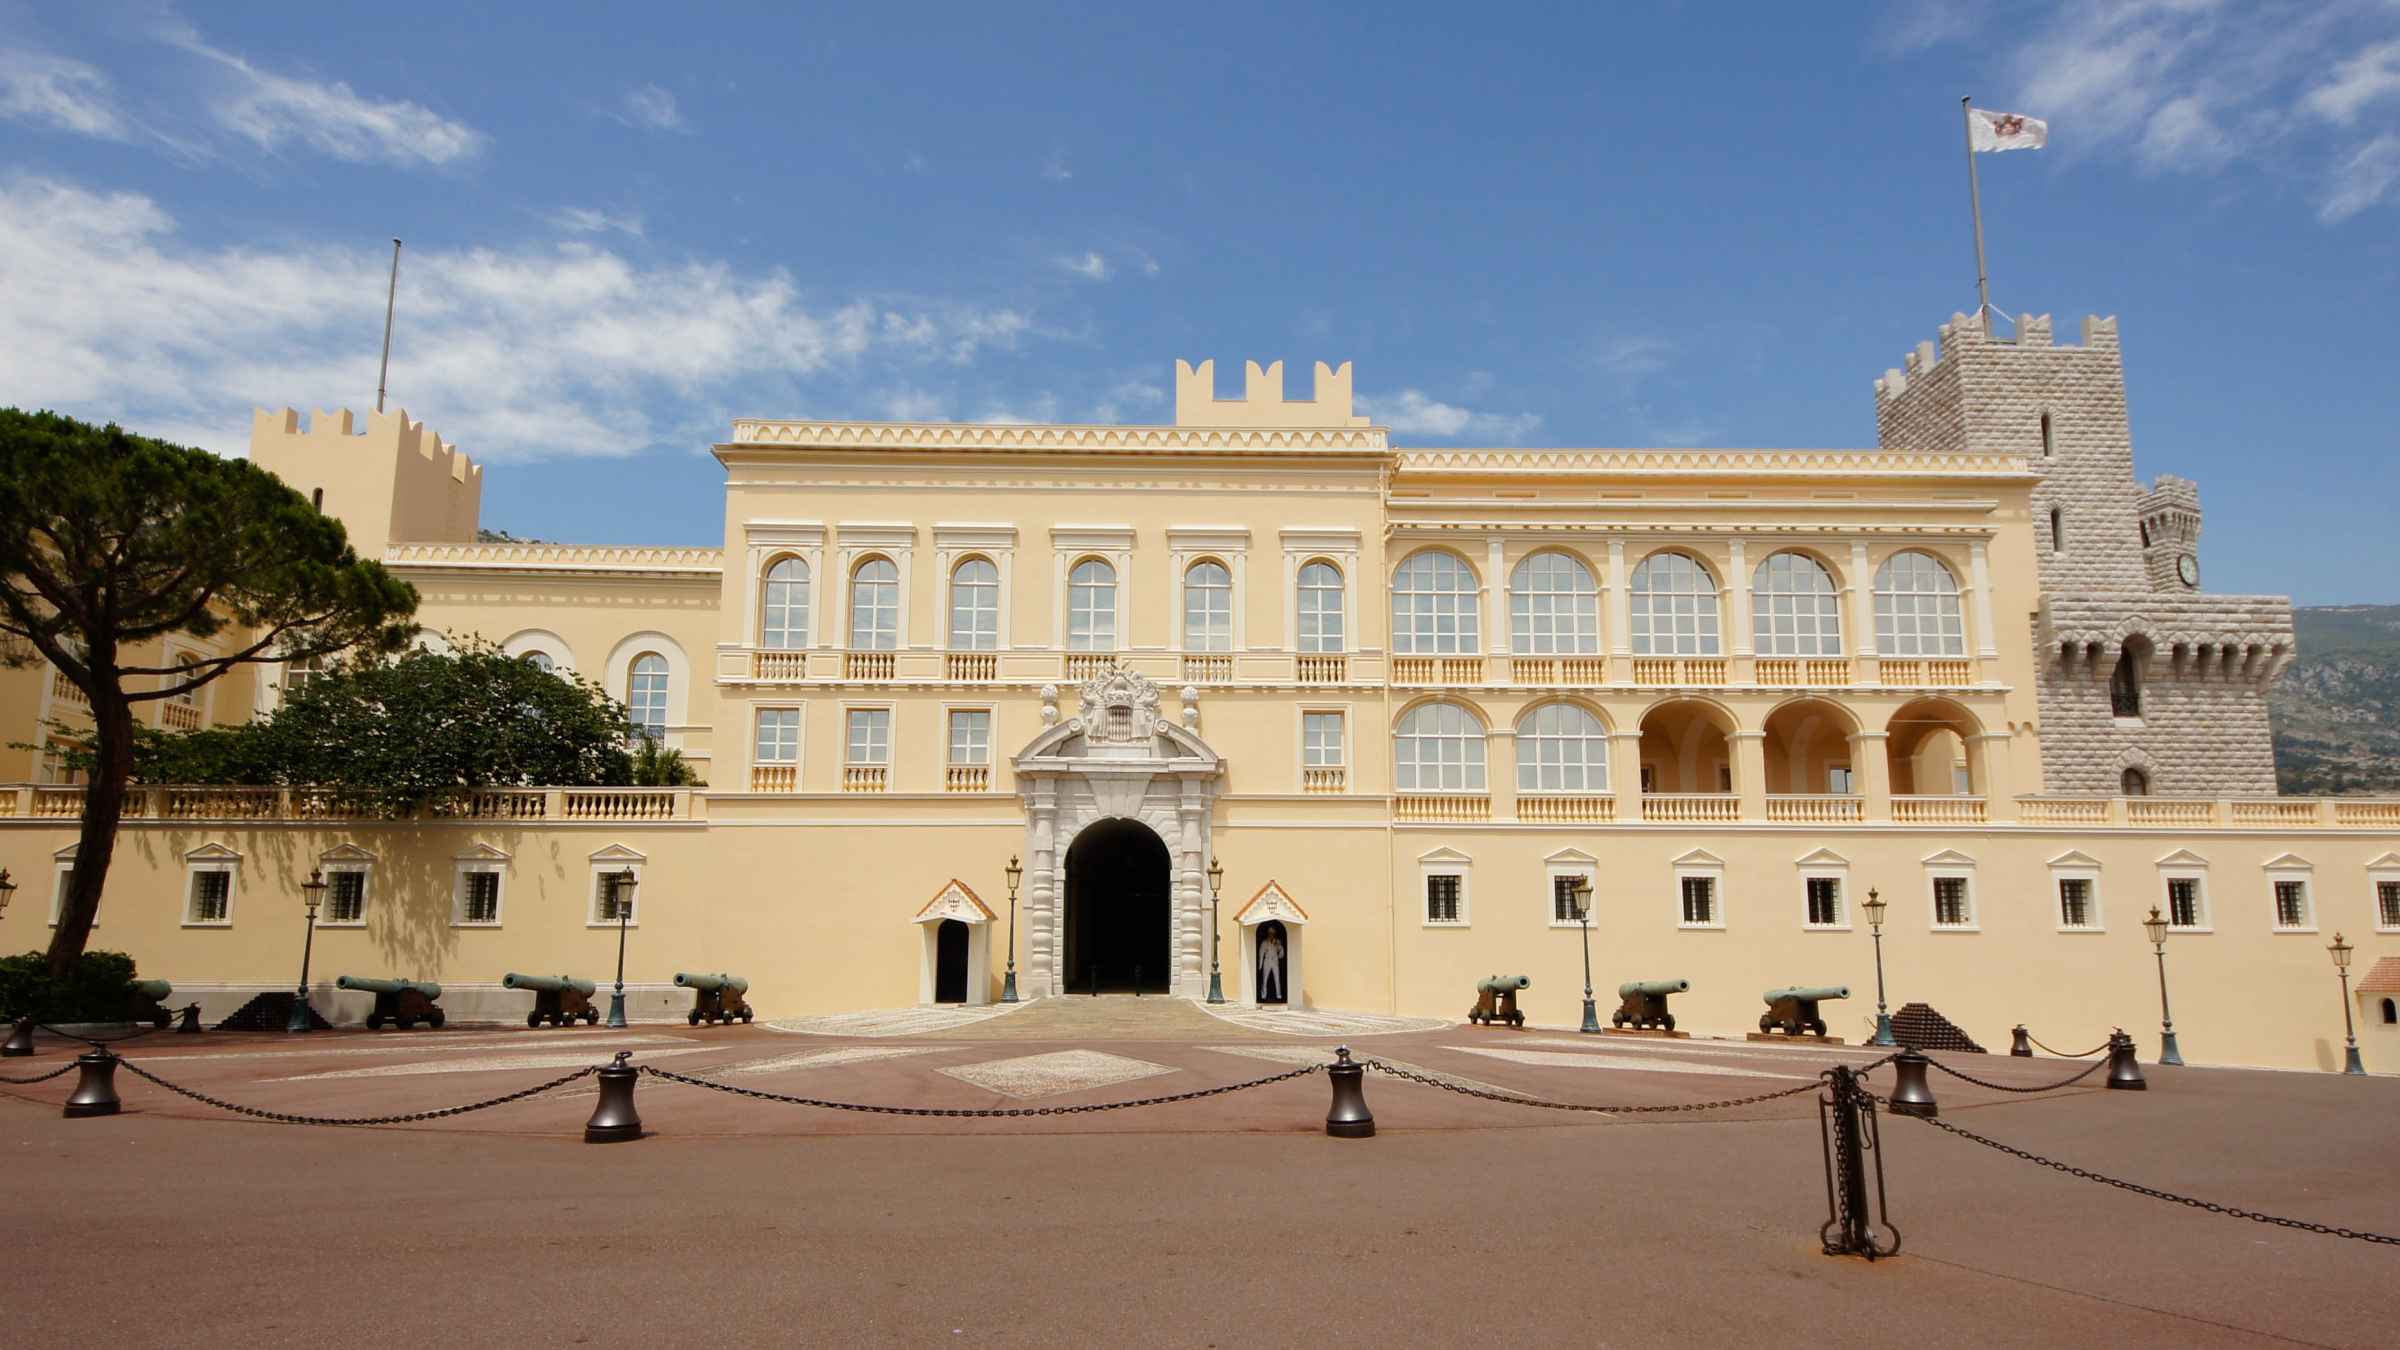 can you visit the palace in monaco